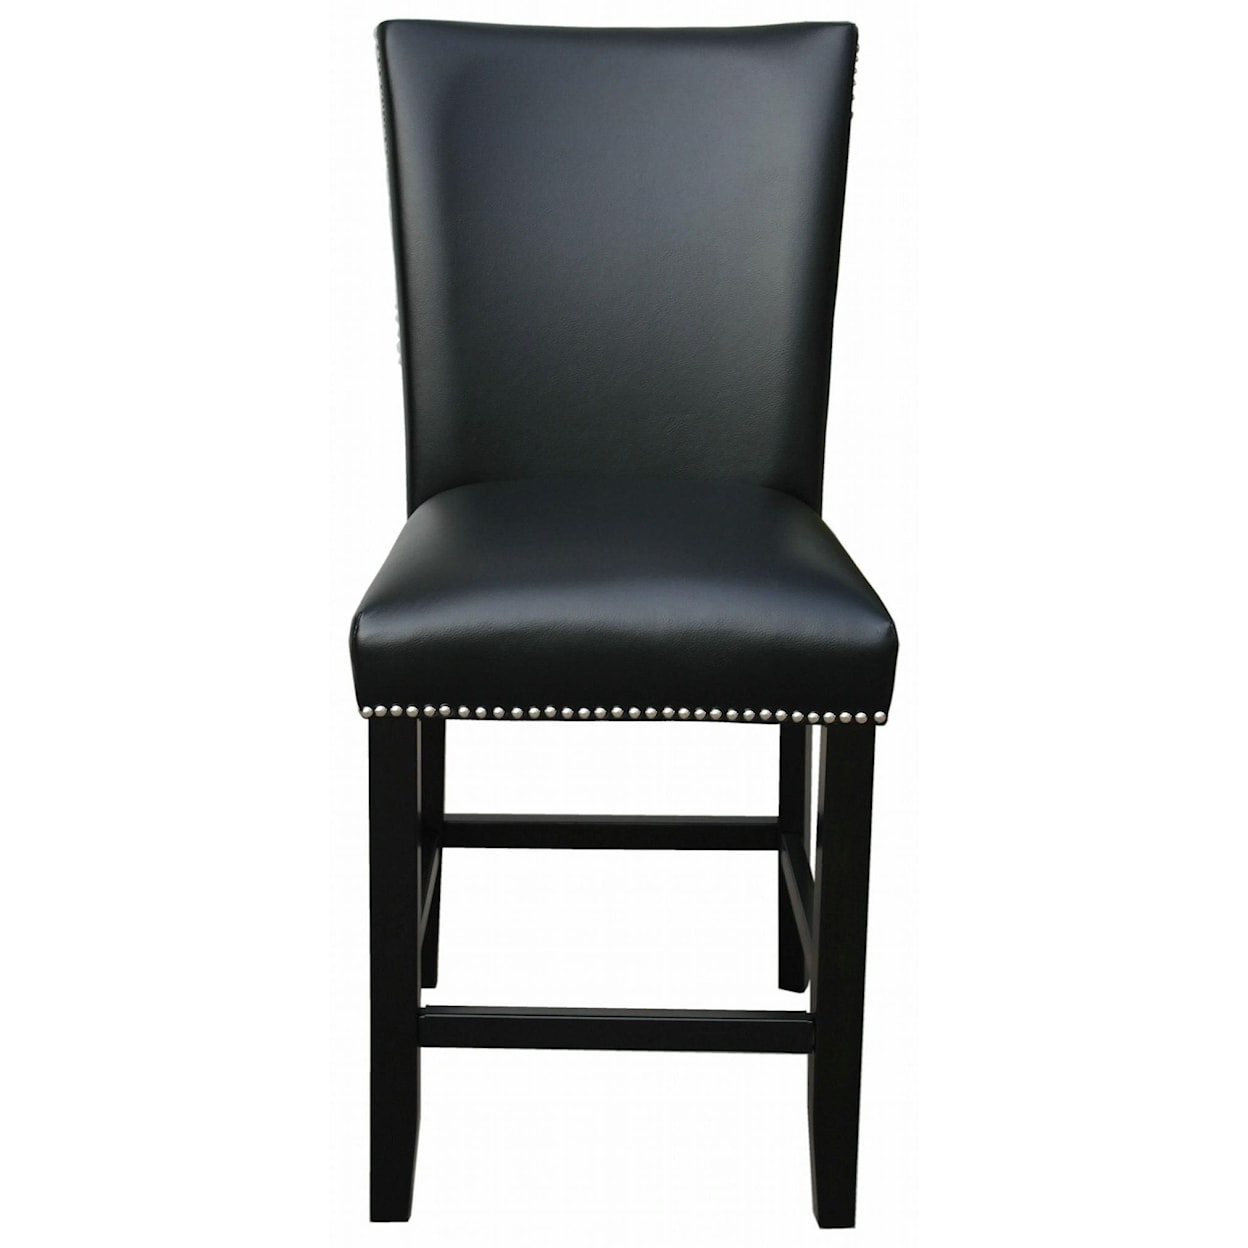 Prime Camila Upholstered Counter Chair with Nailhead